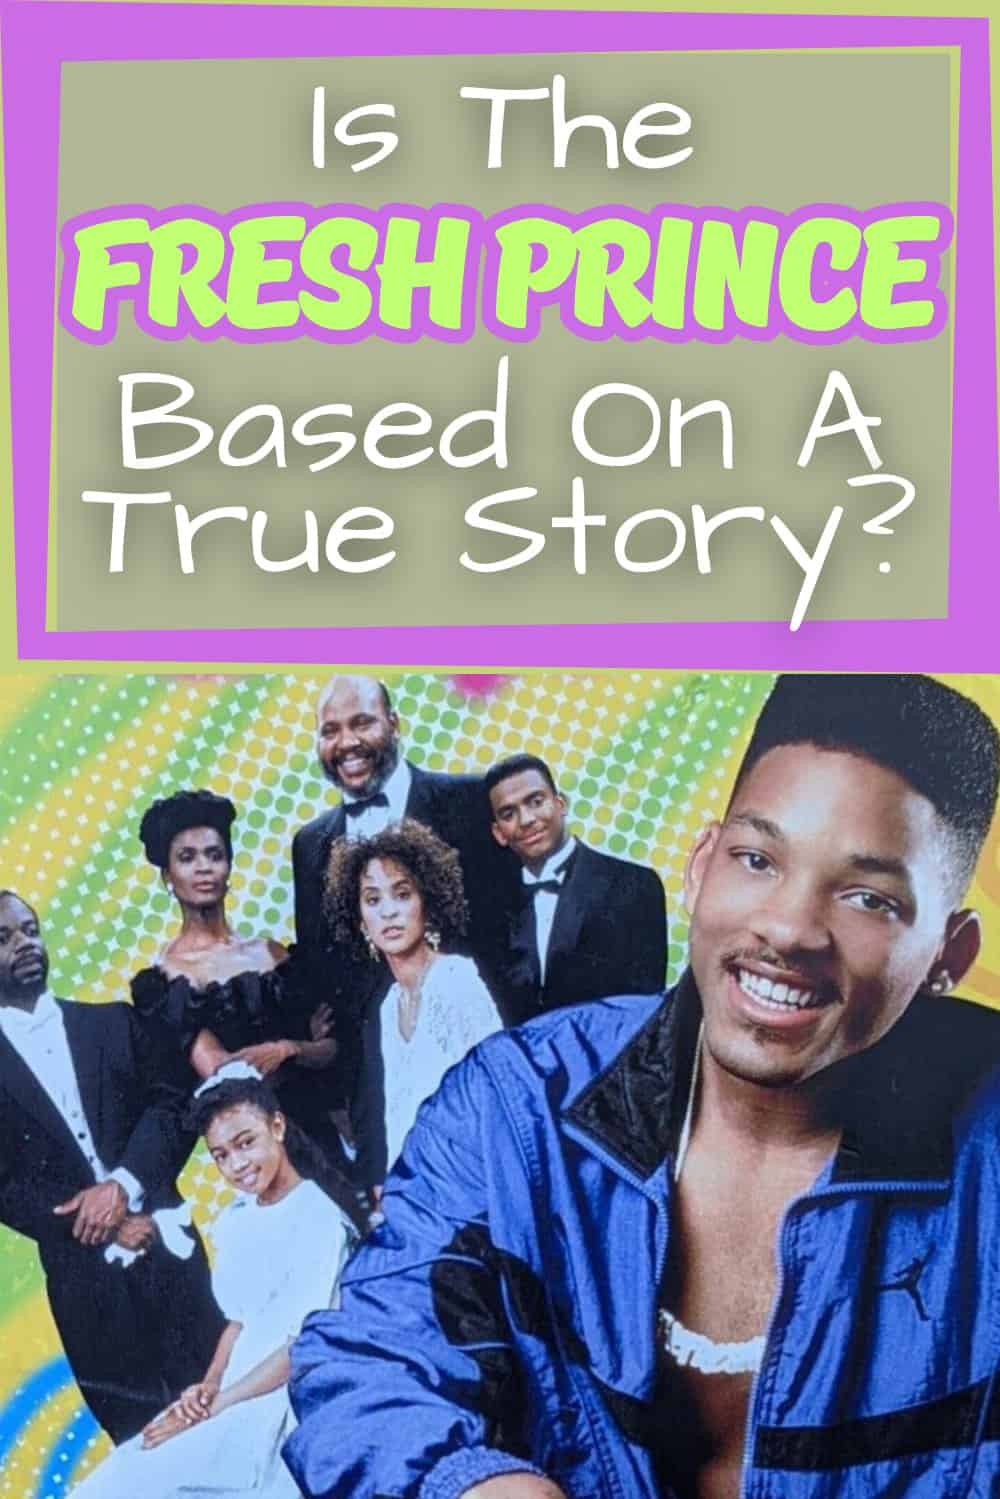 The Fresh Prince of Bel-Air is loosely based on a true story